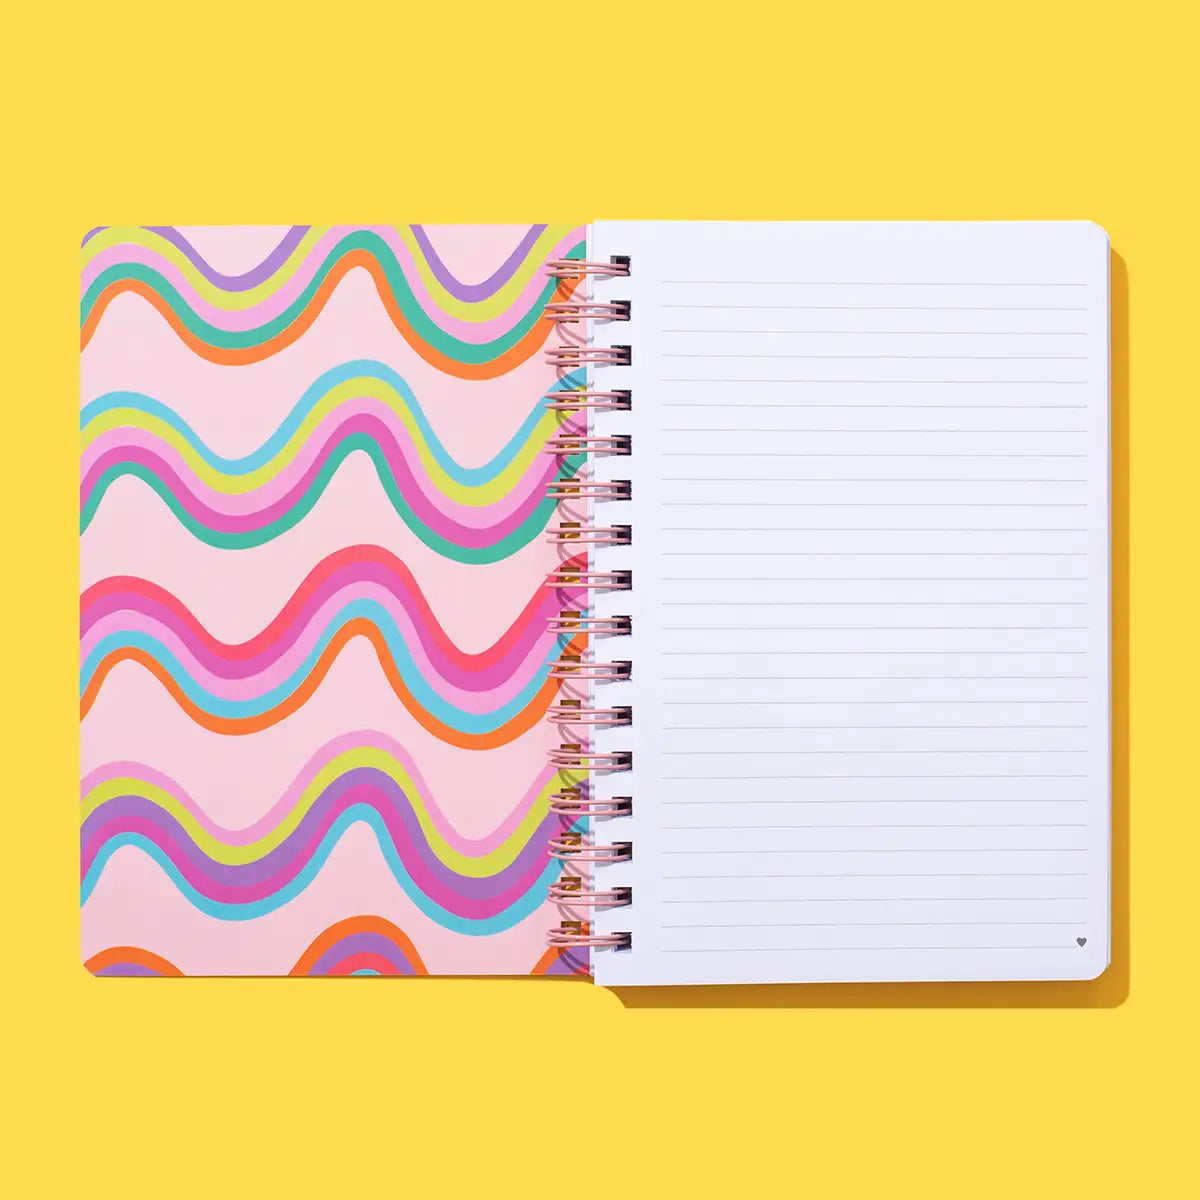 BE THE SUNSHINE SPIRAL NOTEBOOK